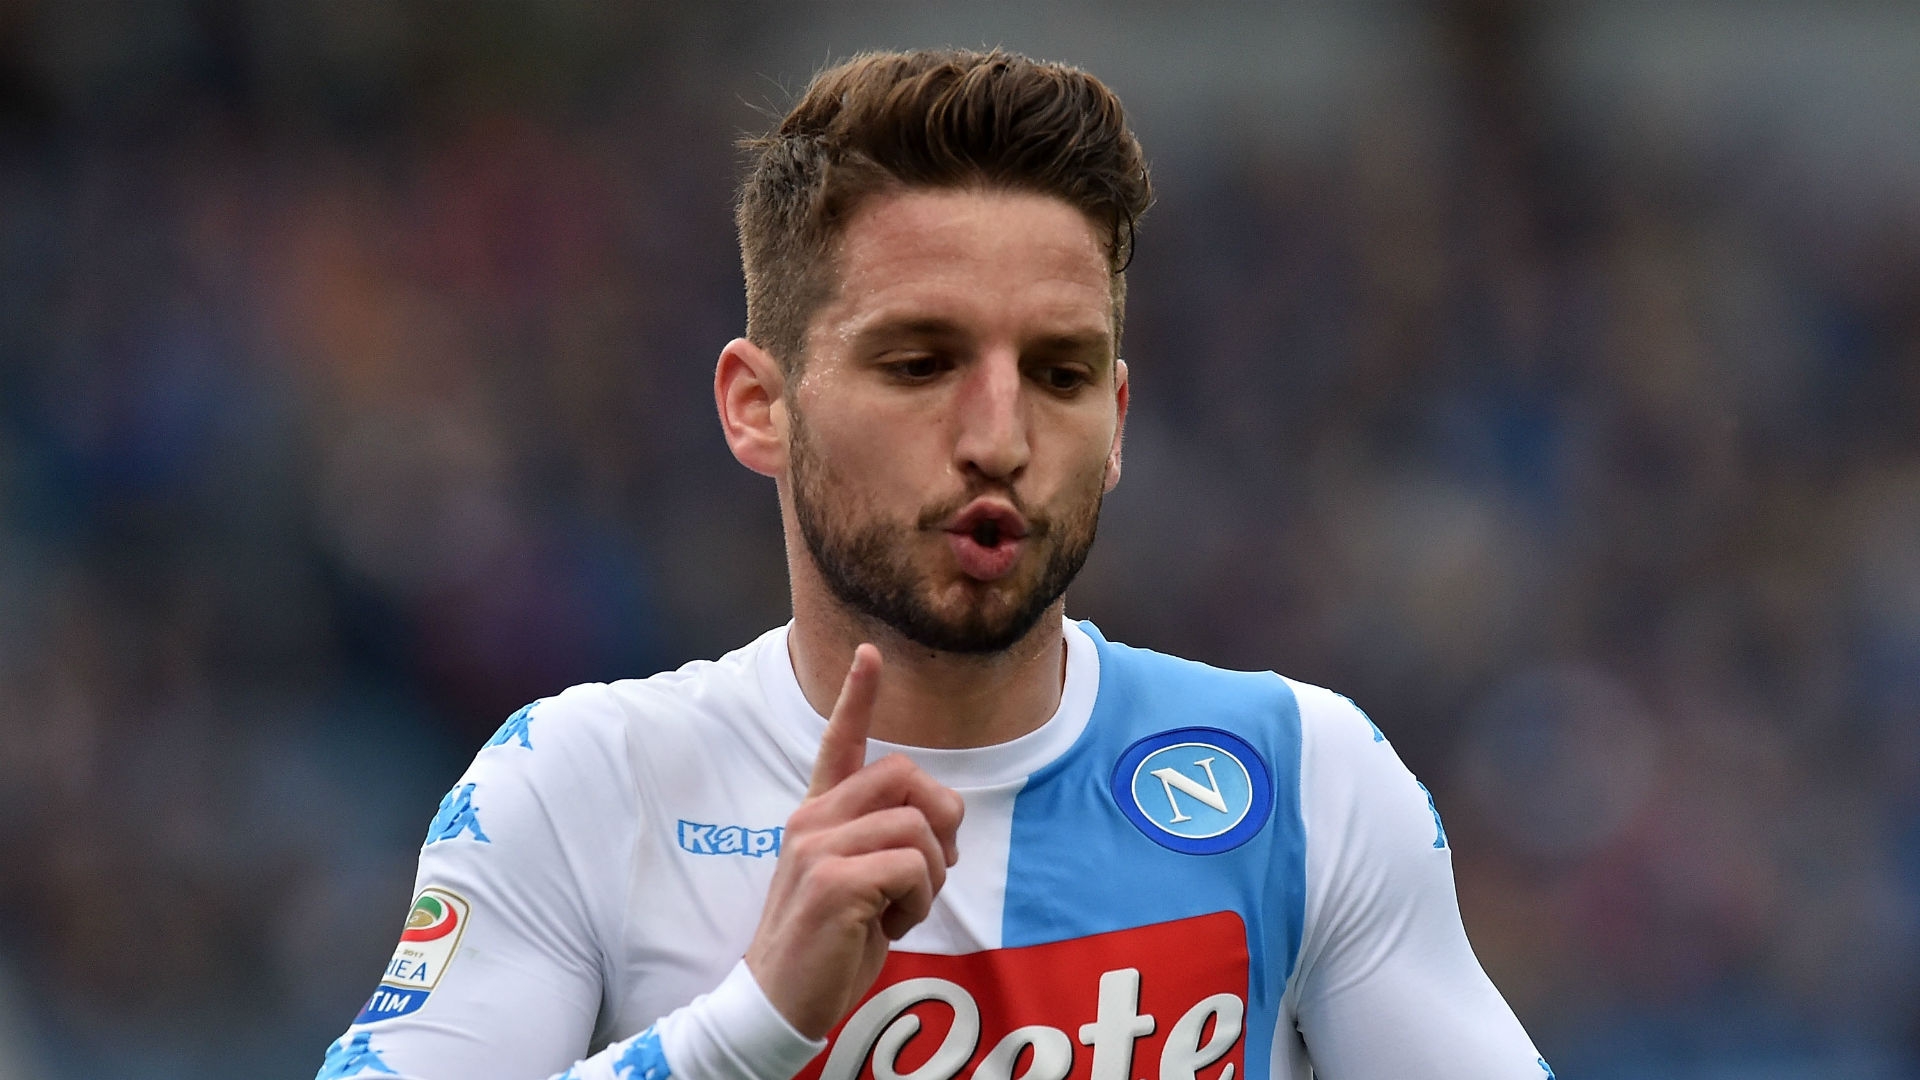 Mertens conirms there was interest from Chelsea and Barcelona